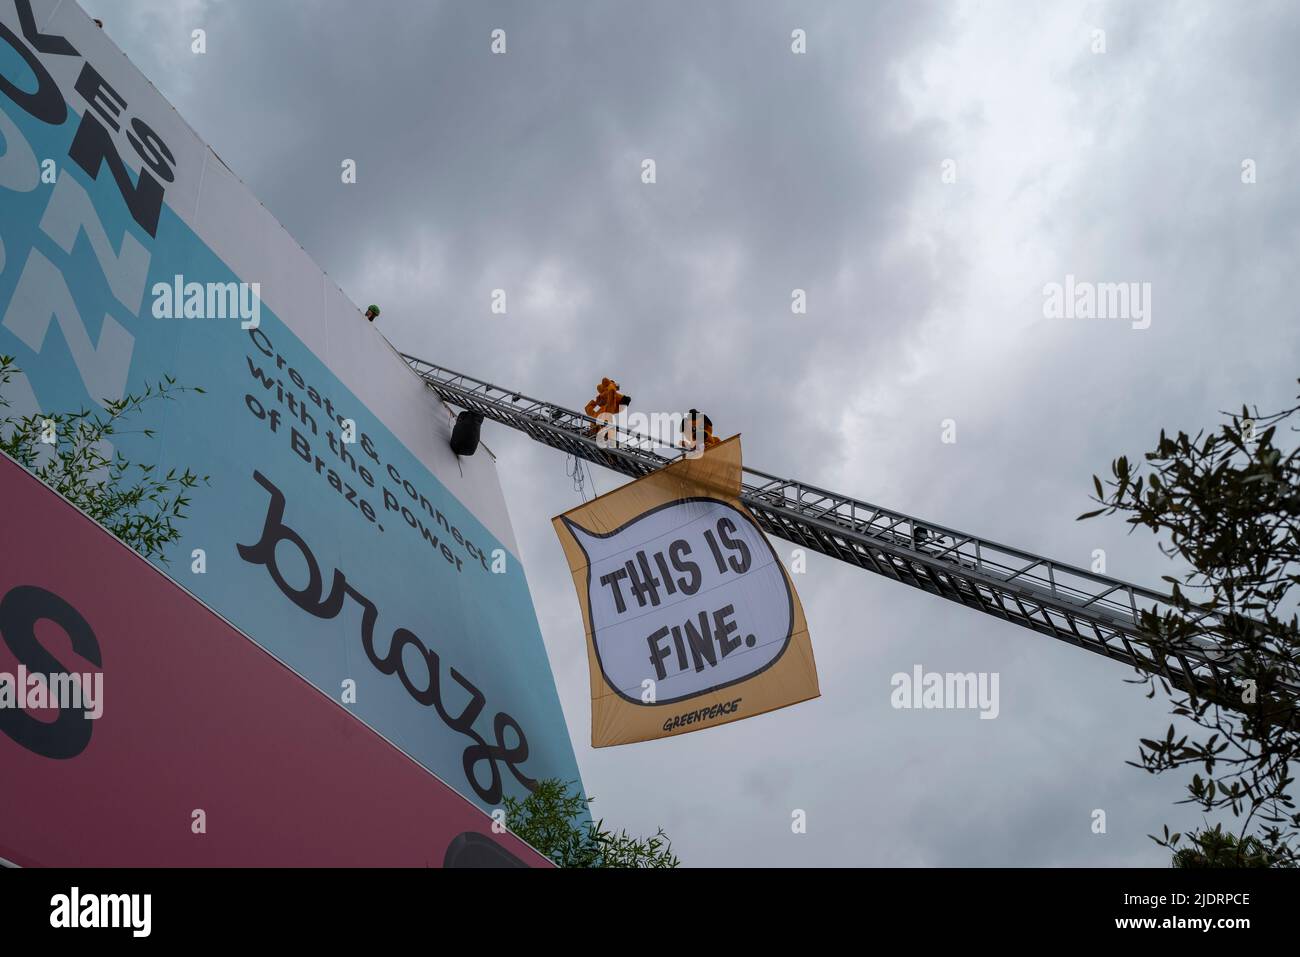 Cannes, France, 23 June 2022, Greenpeace Protest Atop The Palais, Guerrilla Campaign Continues at Cannes Lions Festival - International Festival of Creativity © ifnm press / Alamy Live News Stock Photo